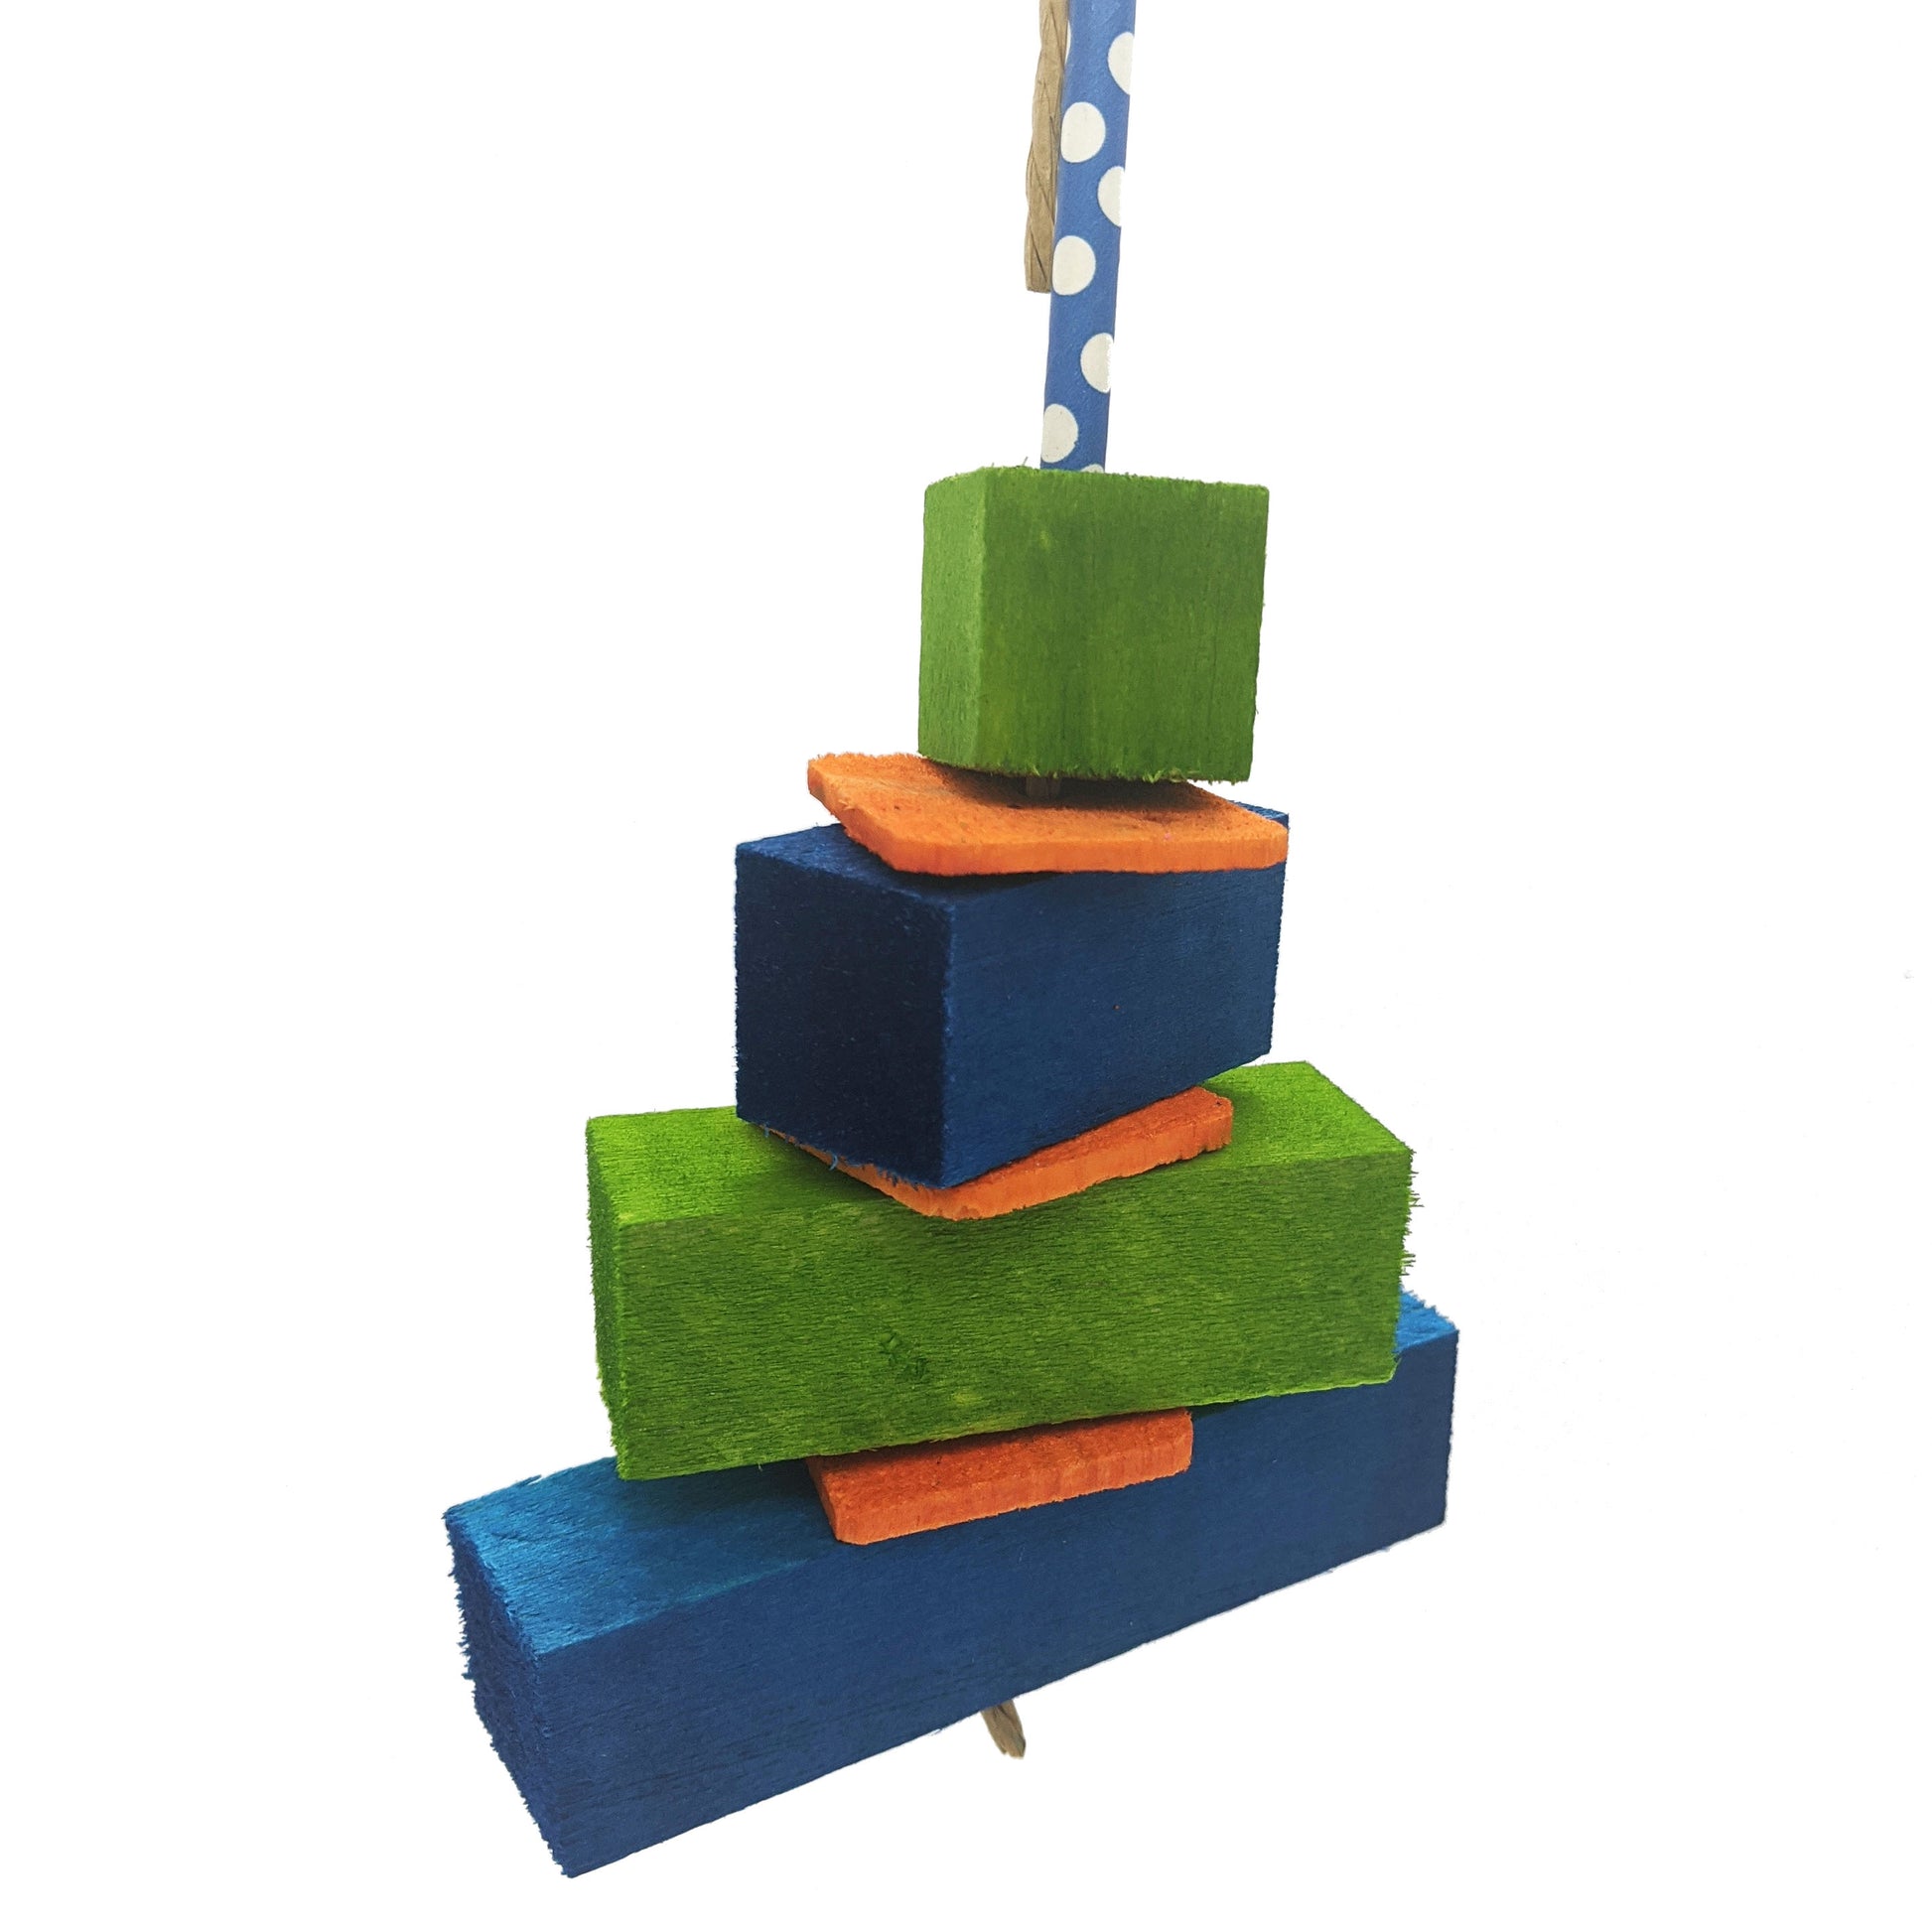 A parrot toy resembling a birthday cake. Has layers made with 1 inch thick balsa, going from 1 inch wide to 4 inch wide, and separated by one-eighth inch thin pine slices. Topped with paper straw candle. Green, blue, and orange color theme. 